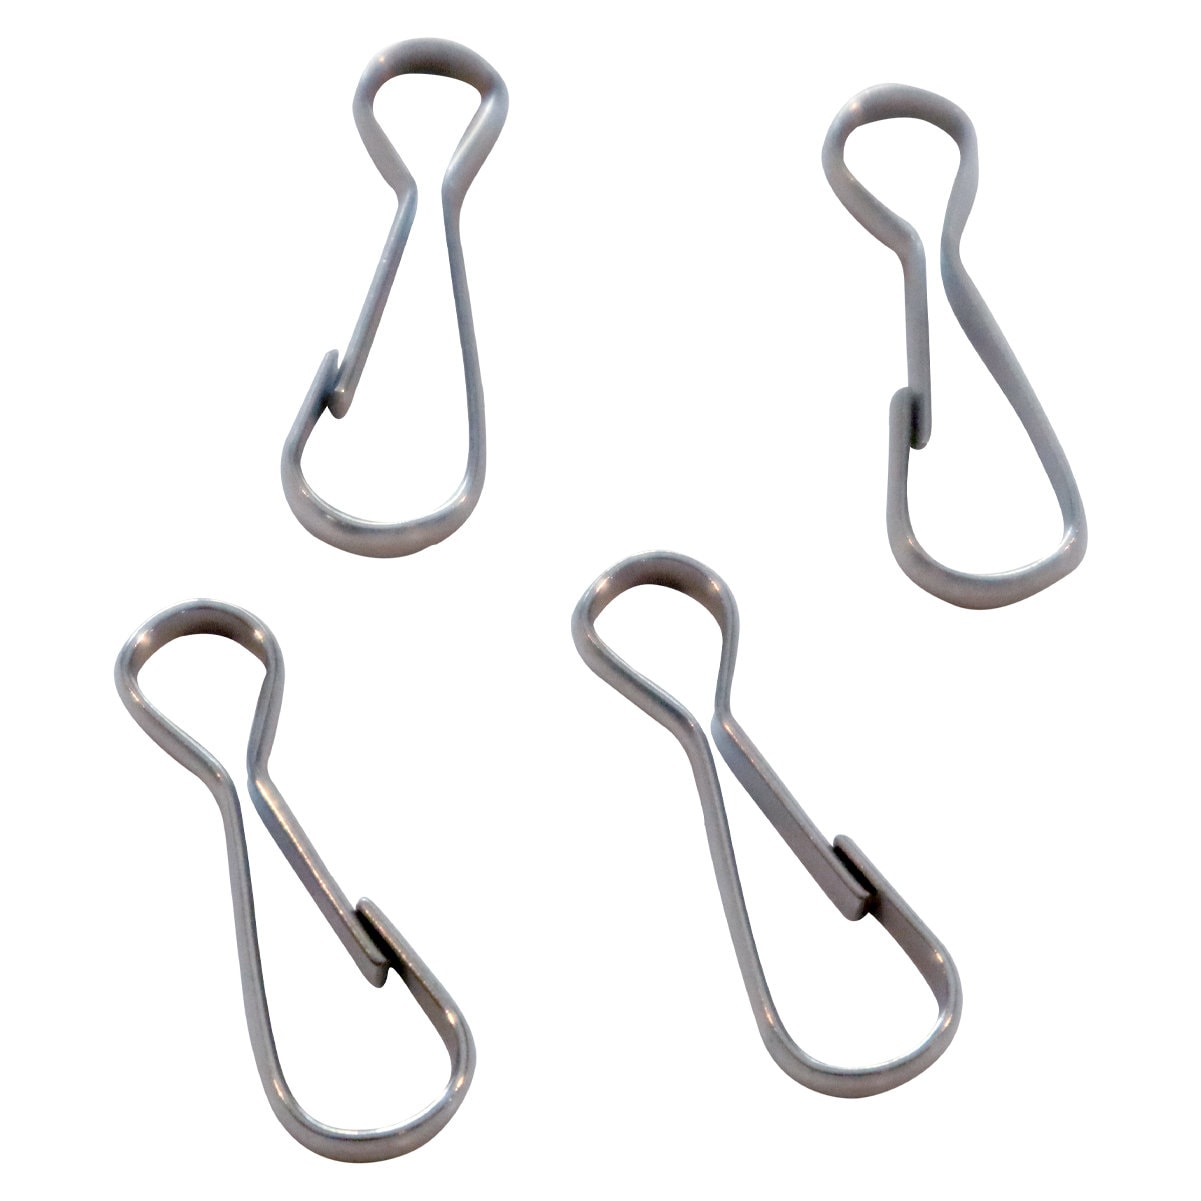 25 Small Metal Spring Clips Free Shipping 1 1/4 Inch J Hook Clasp DIY Face  Mask Lanyard for Beading or Paracord Zipper Pulls -  Canada